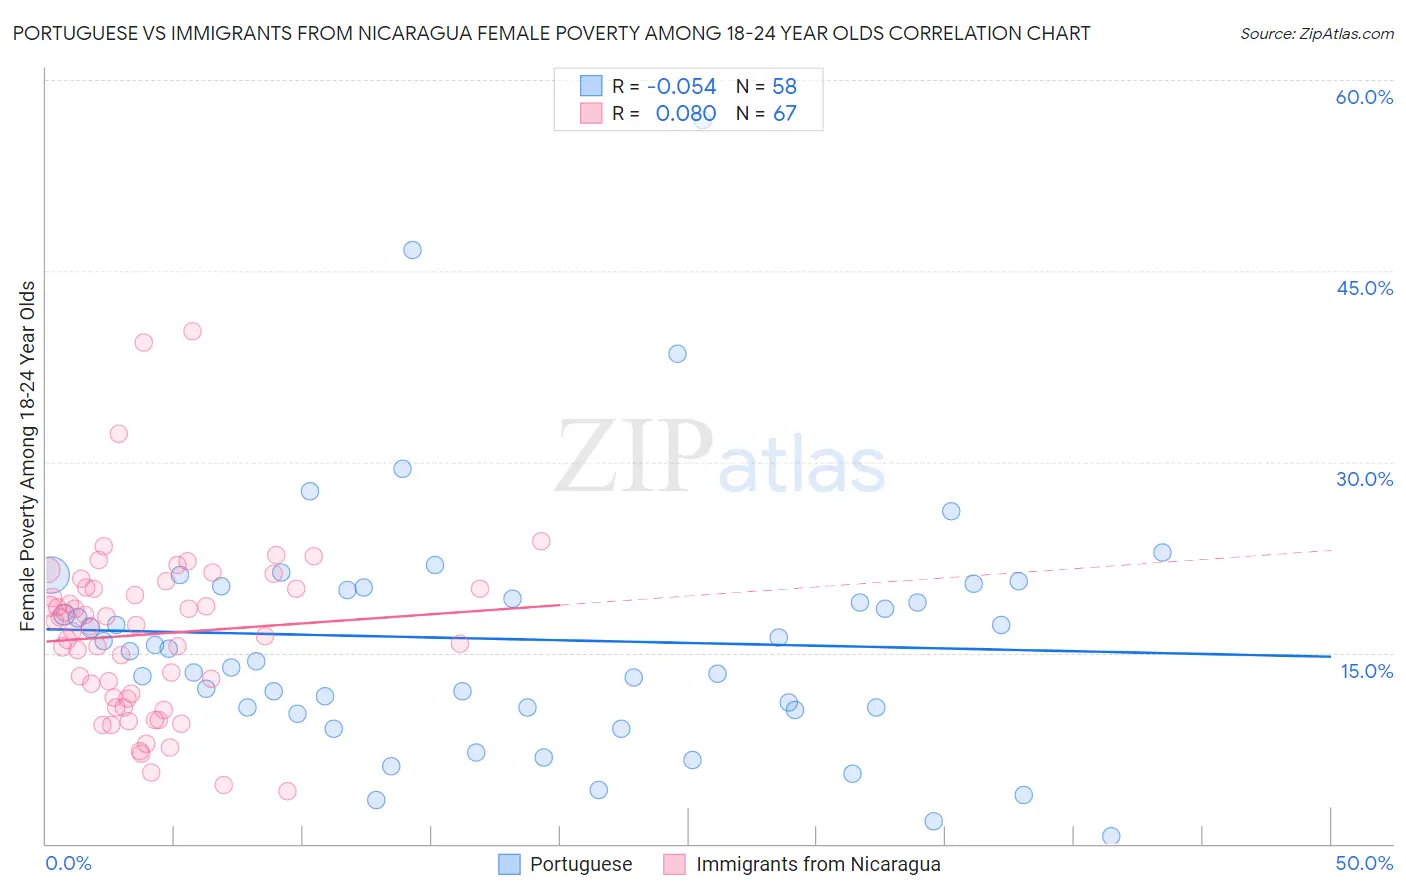 Portuguese vs Immigrants from Nicaragua Female Poverty Among 18-24 Year Olds